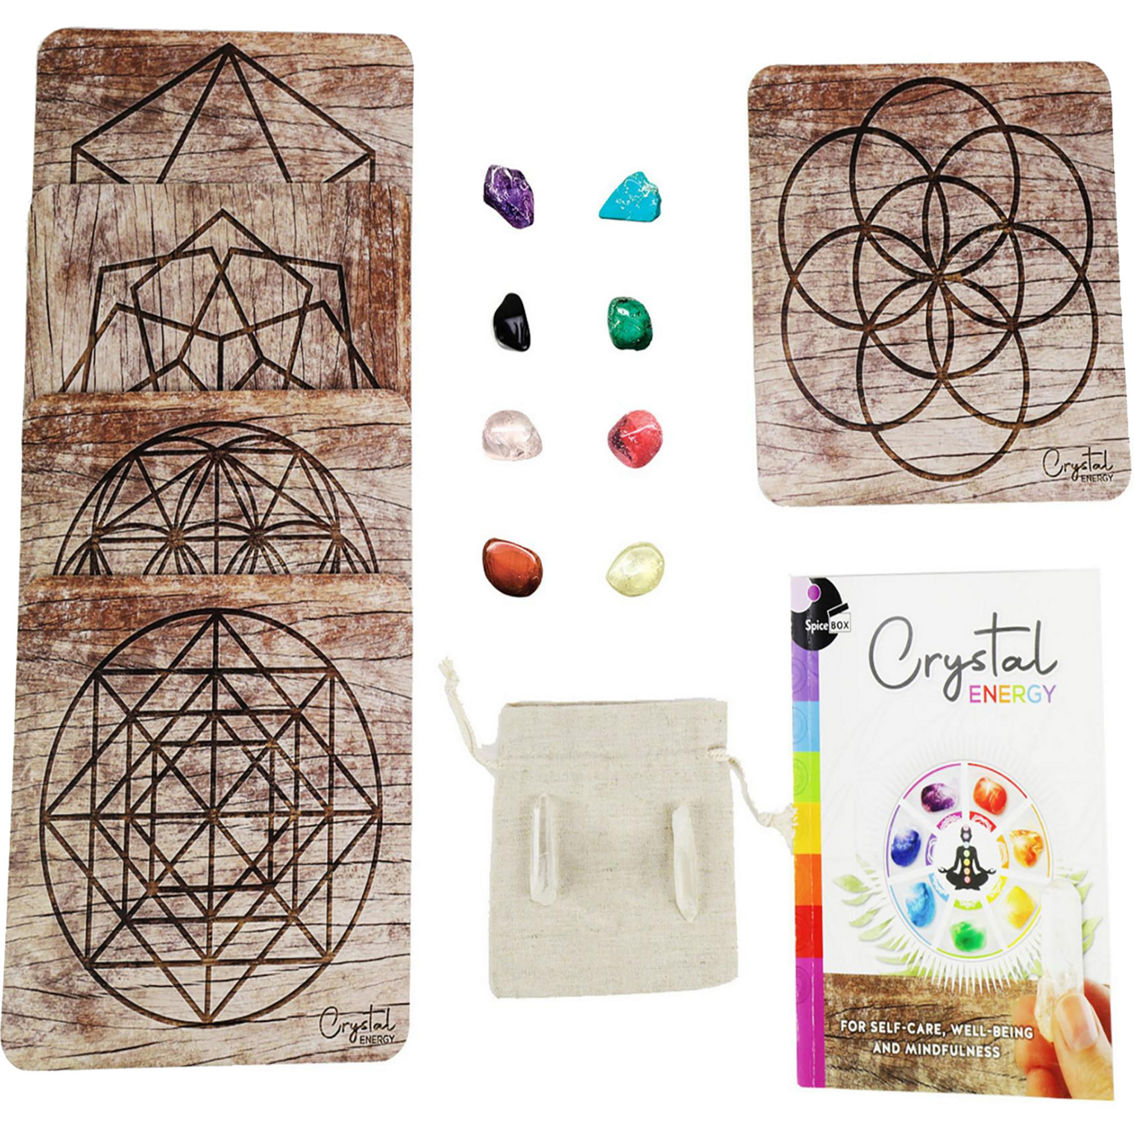 SpiceBox Gift Box: Crystal Energy - Image 4 of 5